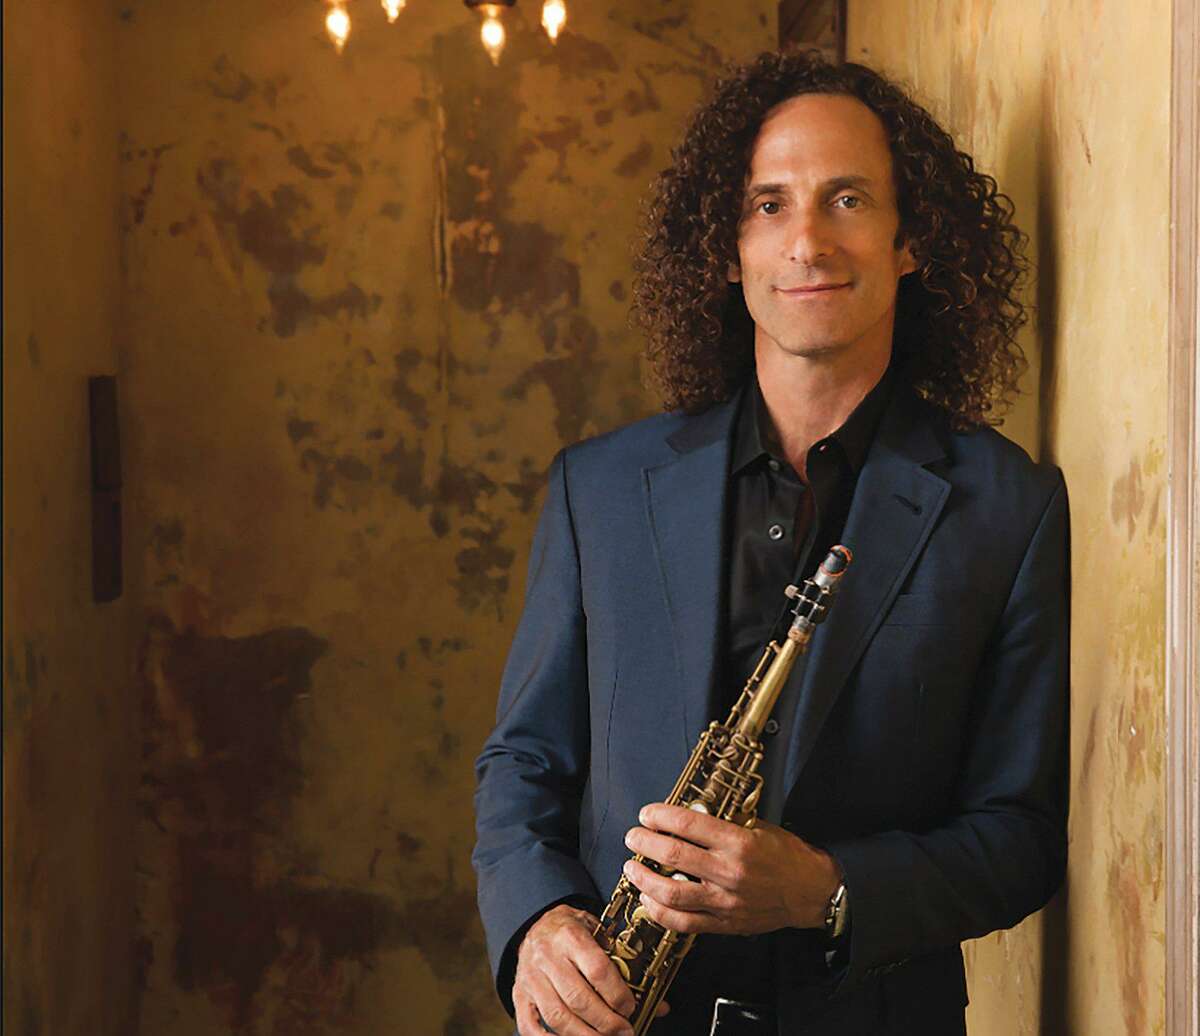 Musician Kenny G is set to perform Dec. 16 at the Palace Theater in downtown Waterbury.